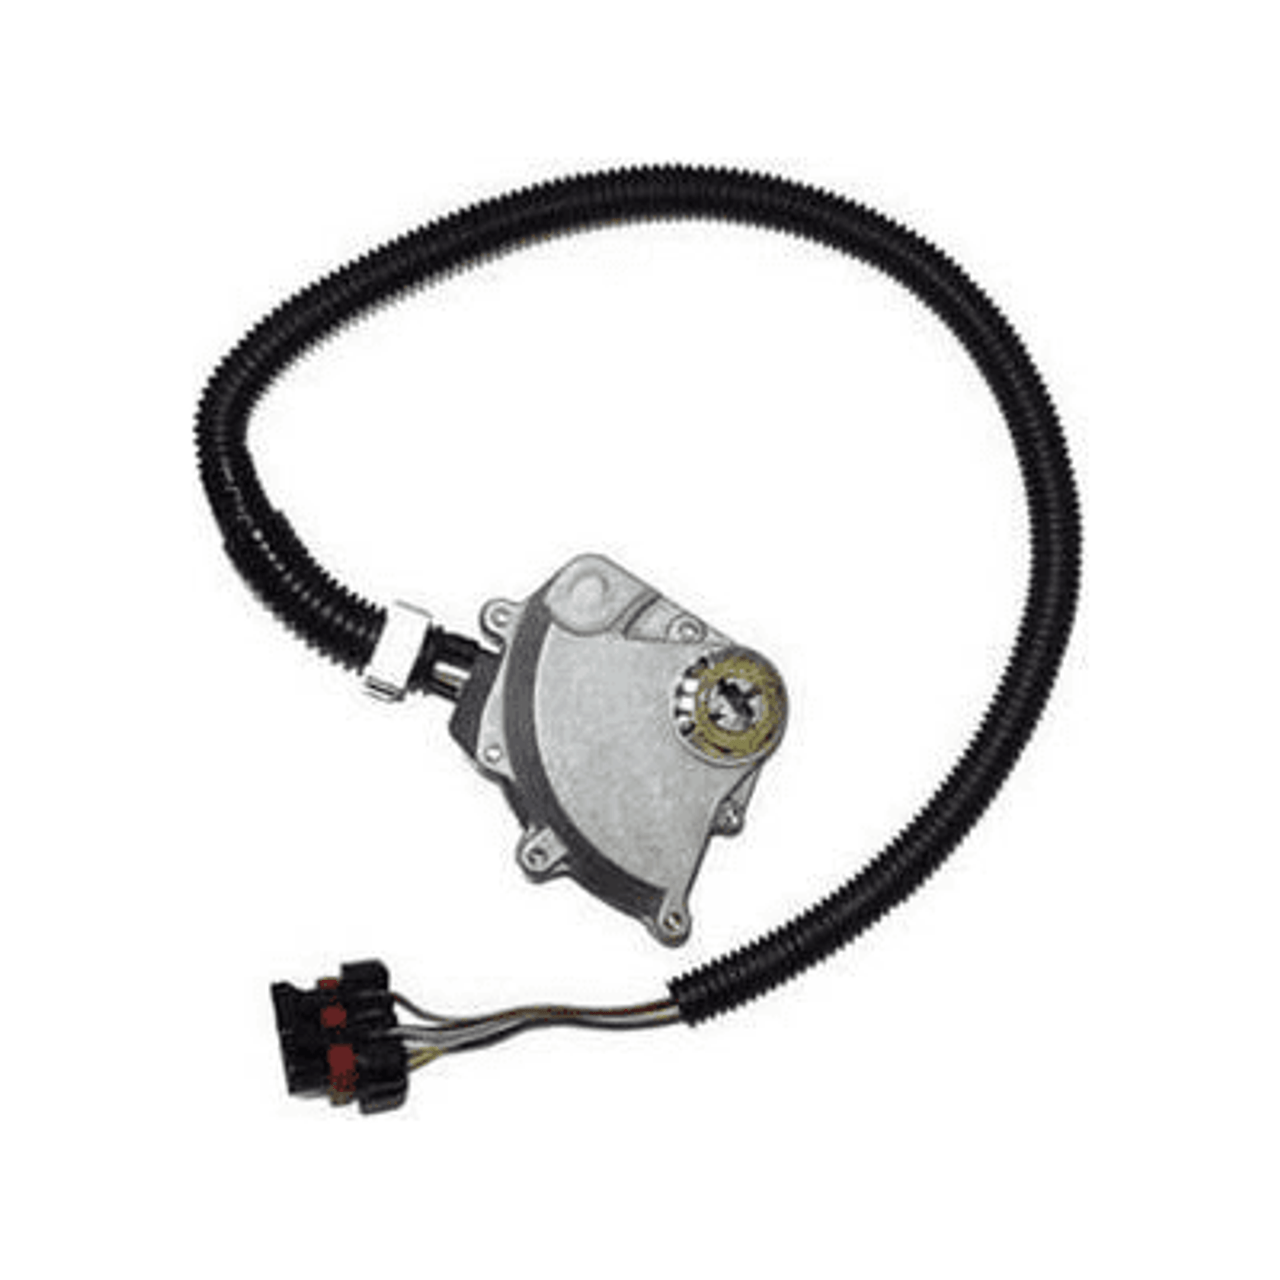 Mopar AW4 Transmission Neutral Safety Switch for 1997-2001 Cherokee XJ -  